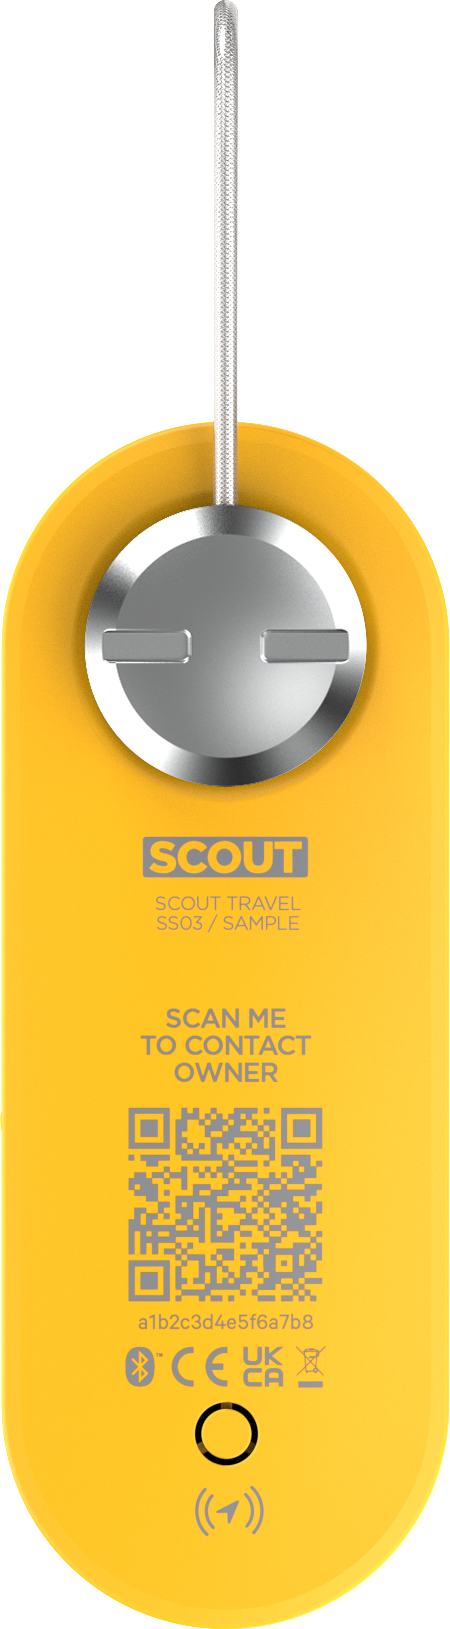 KNOG - Scout Travel Smart Luggage Tag with Tracker - Yellow-4